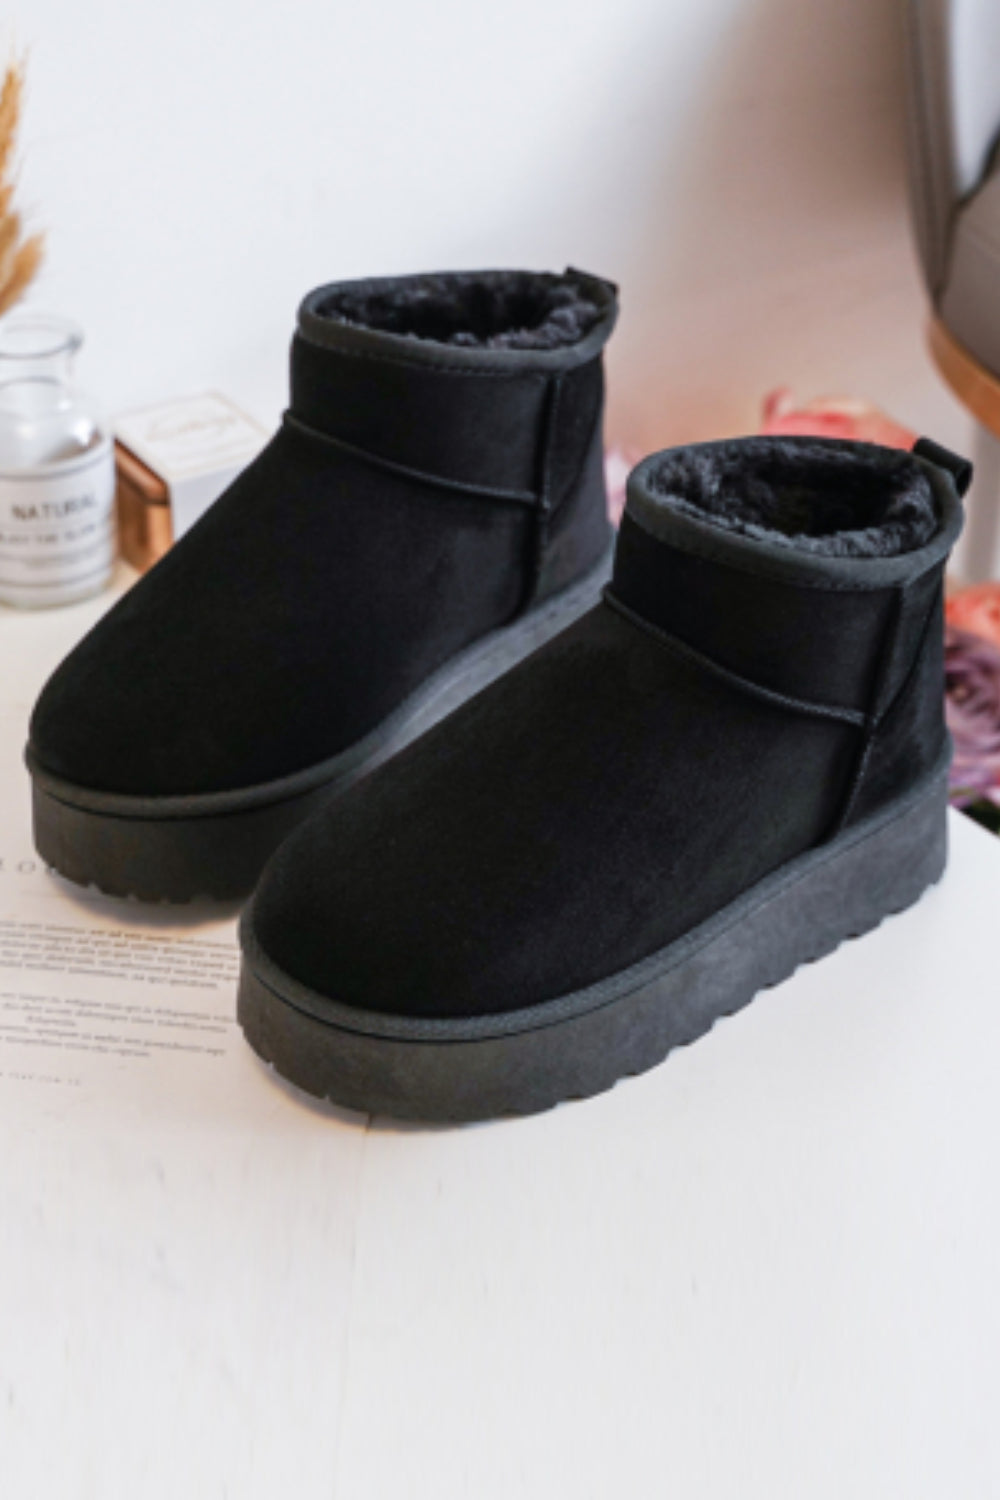 KIDS ANKLE LENGTH FAUX FUR LINING BOOTS IN BLACK 25-30